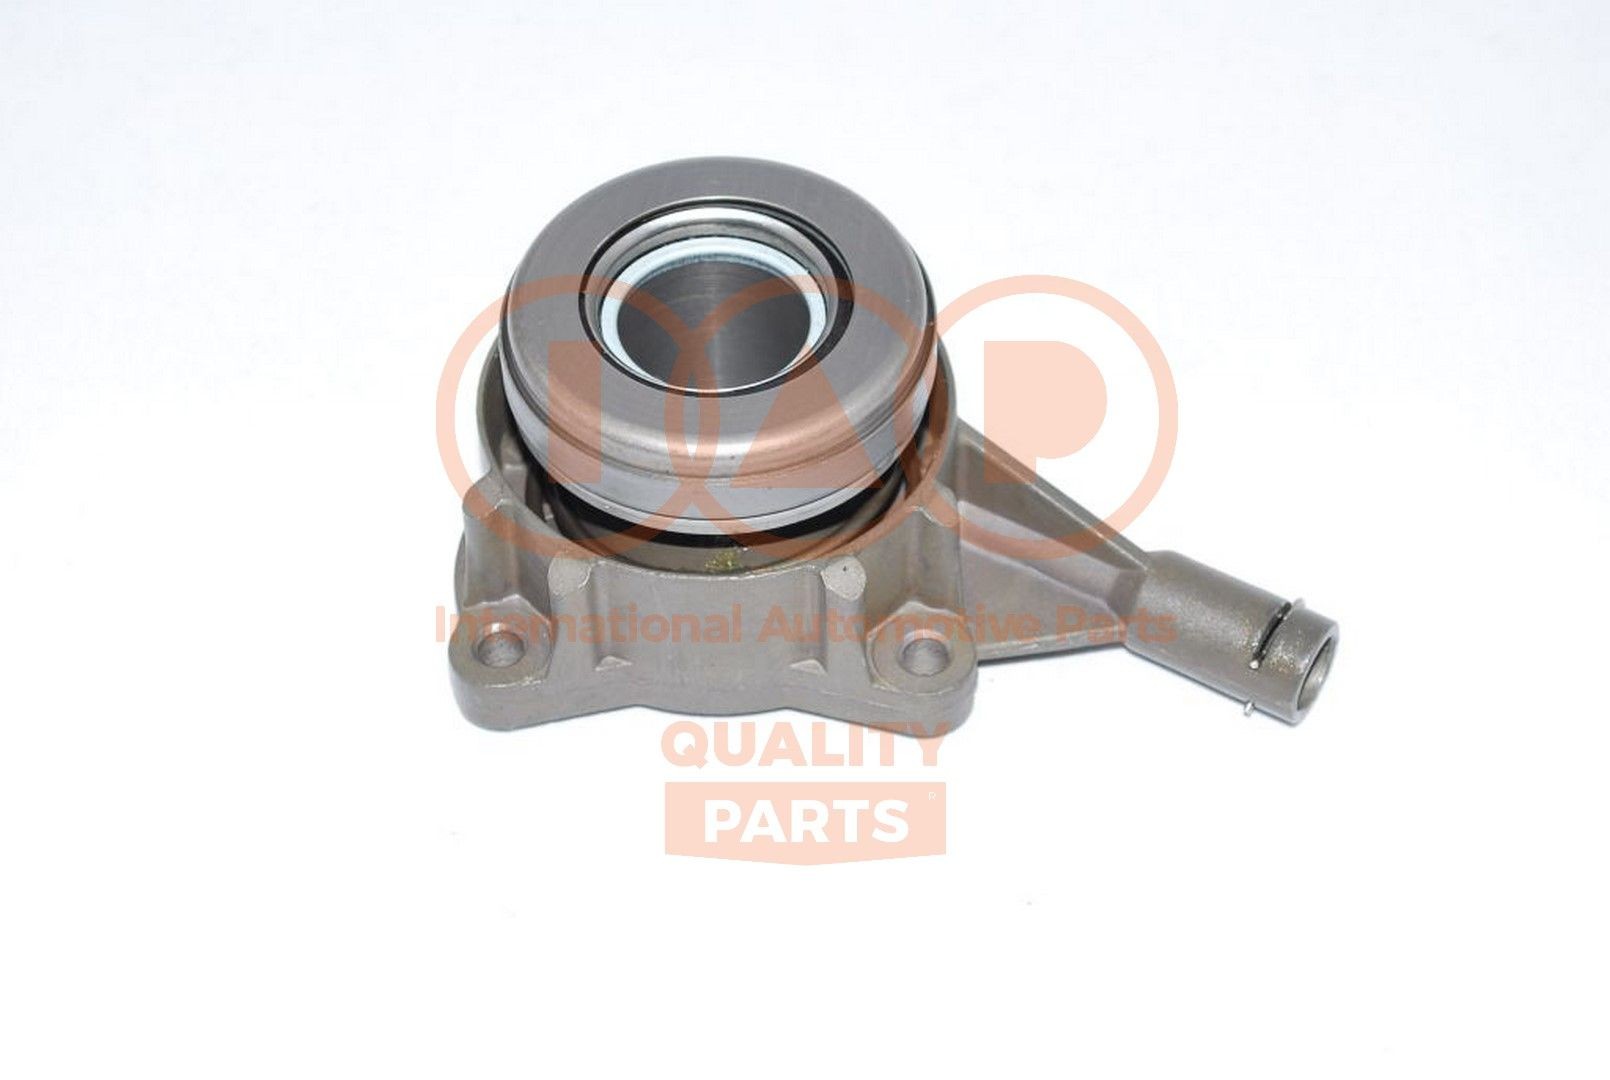 IAP QUALITY PARTS 204-14034 Ford TRANSIT 2005 Release bearing